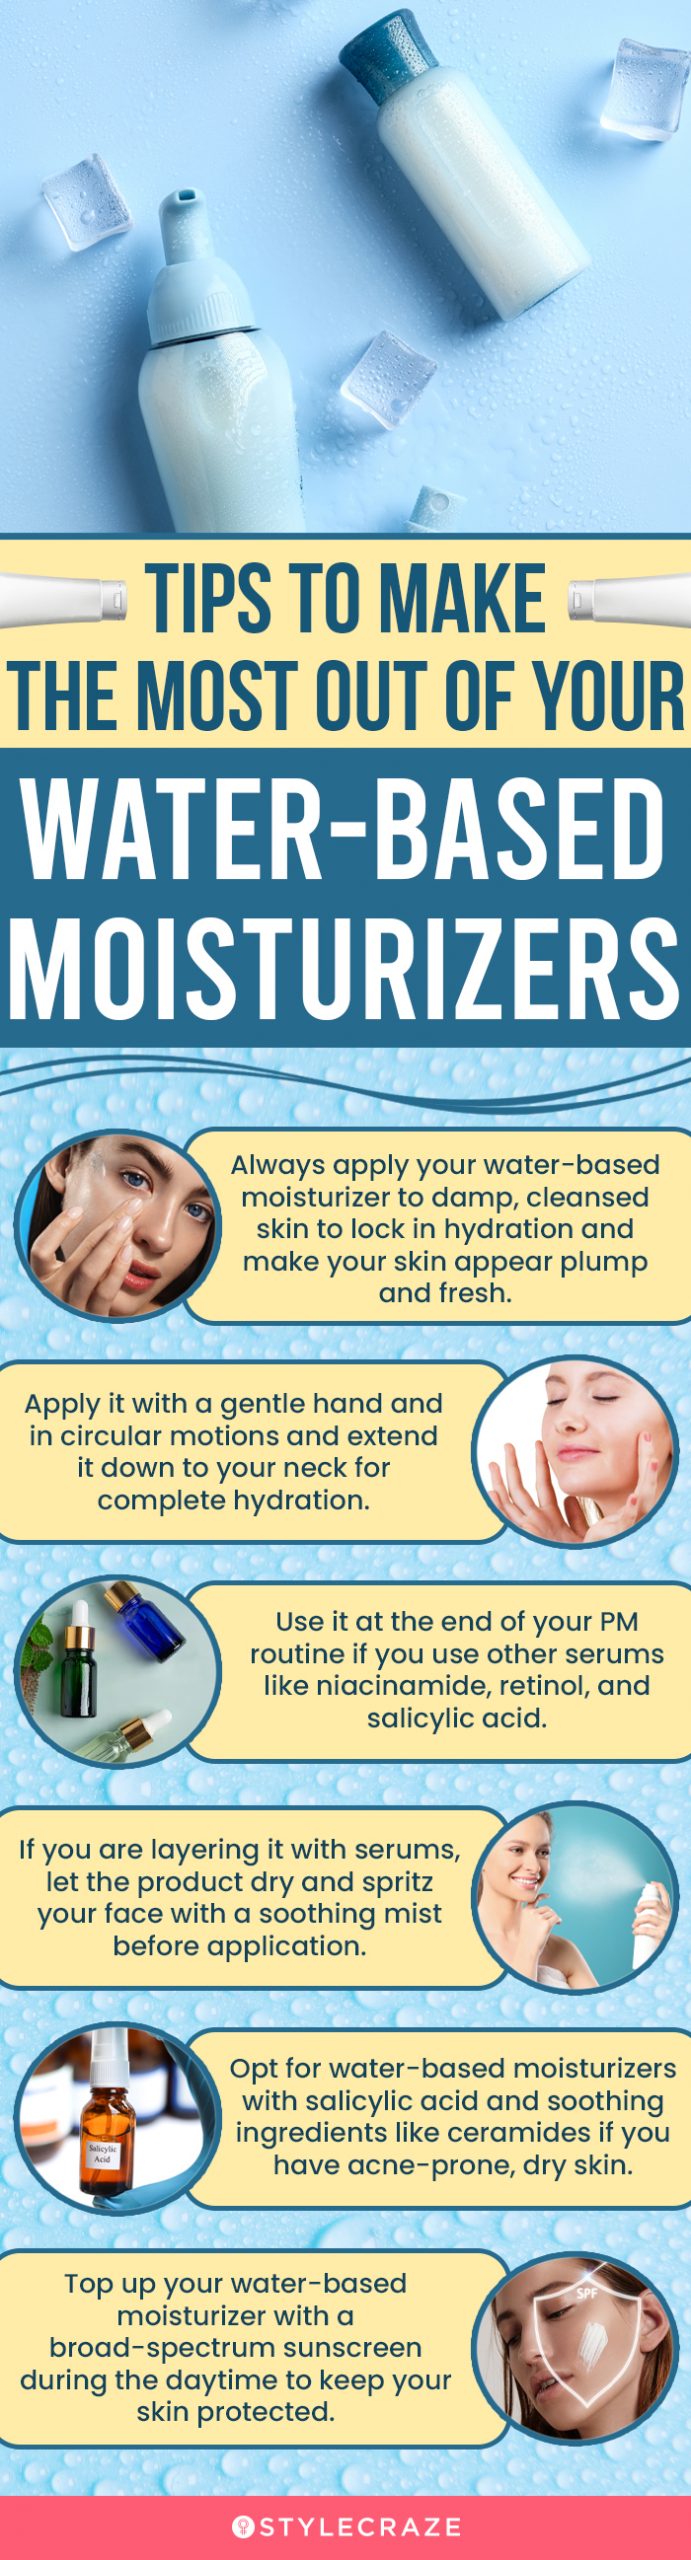 Tips To Make The Most Out Of Your Water-Based Moisturizers (infographic)